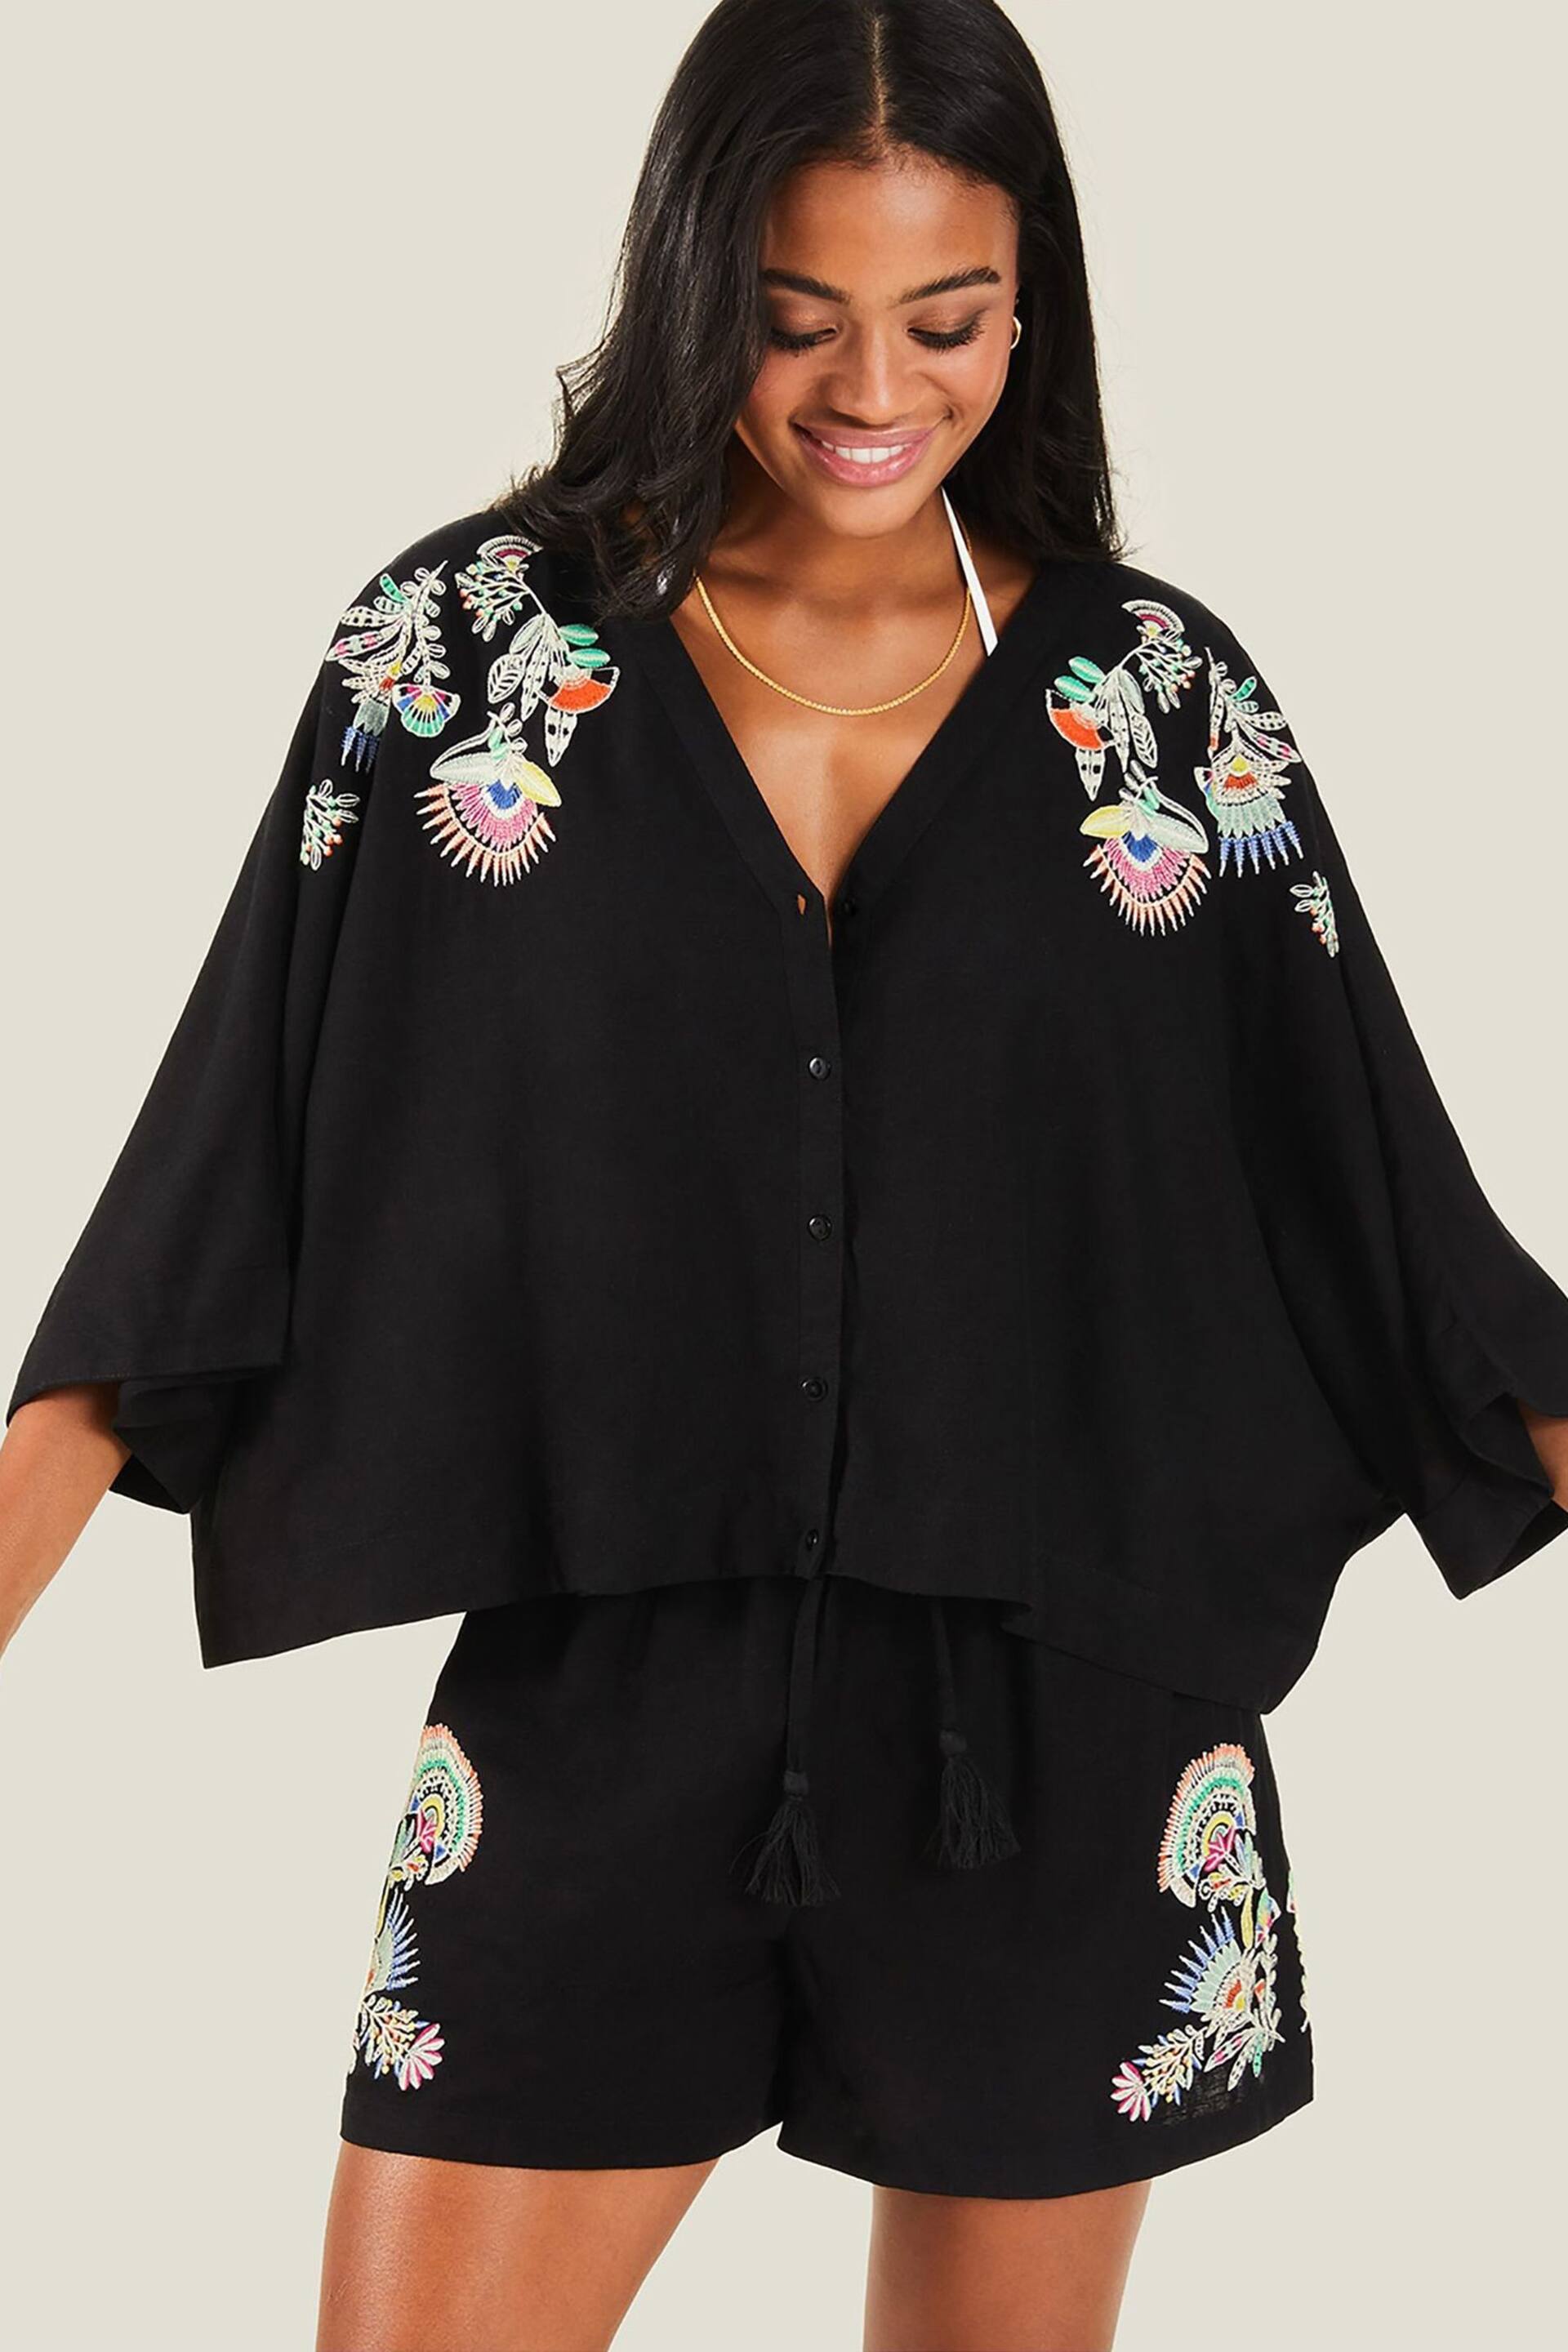 Accessorize Black Embroidered Beach Shirt - Image 1 of 3